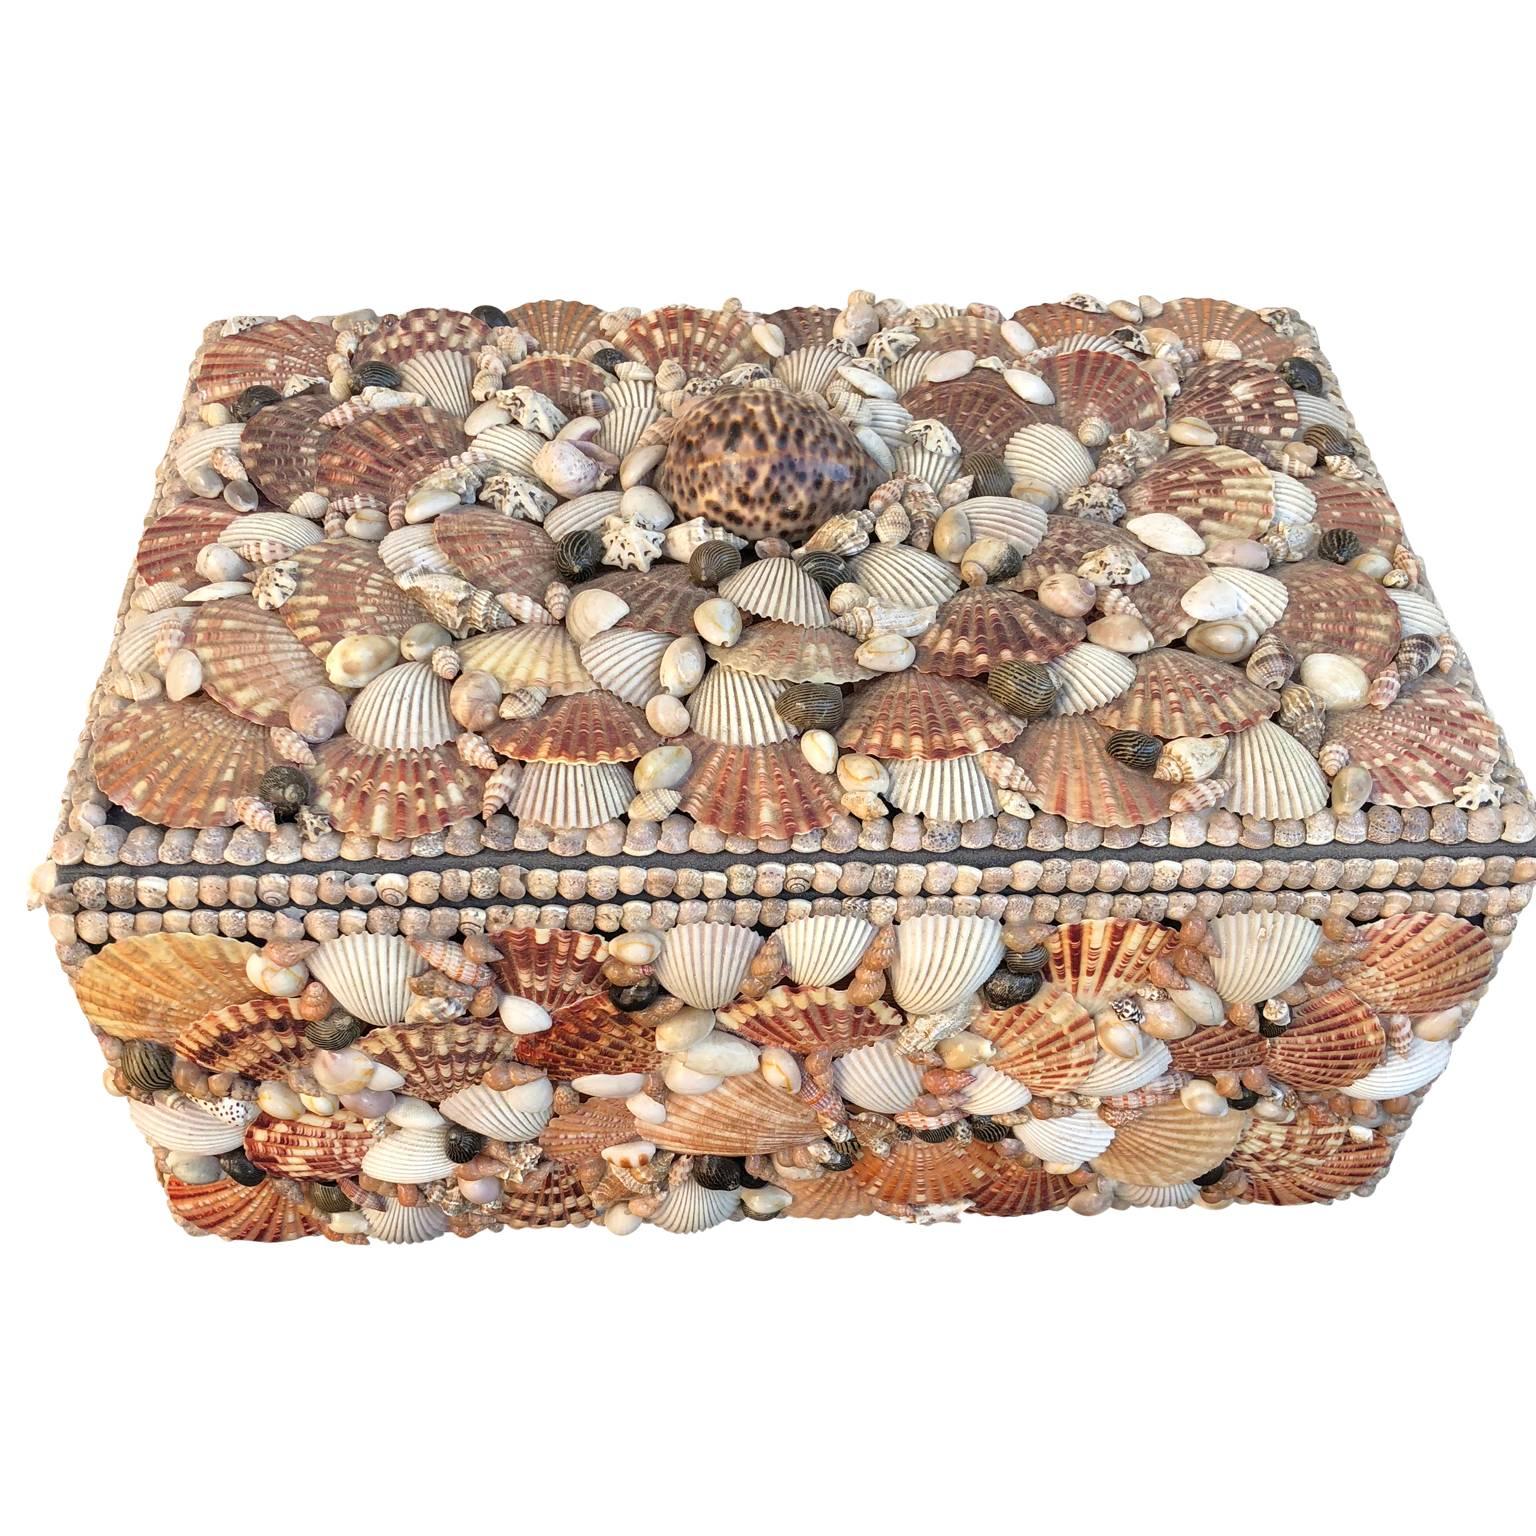 Vintage jewelry box covered pacific seashell.